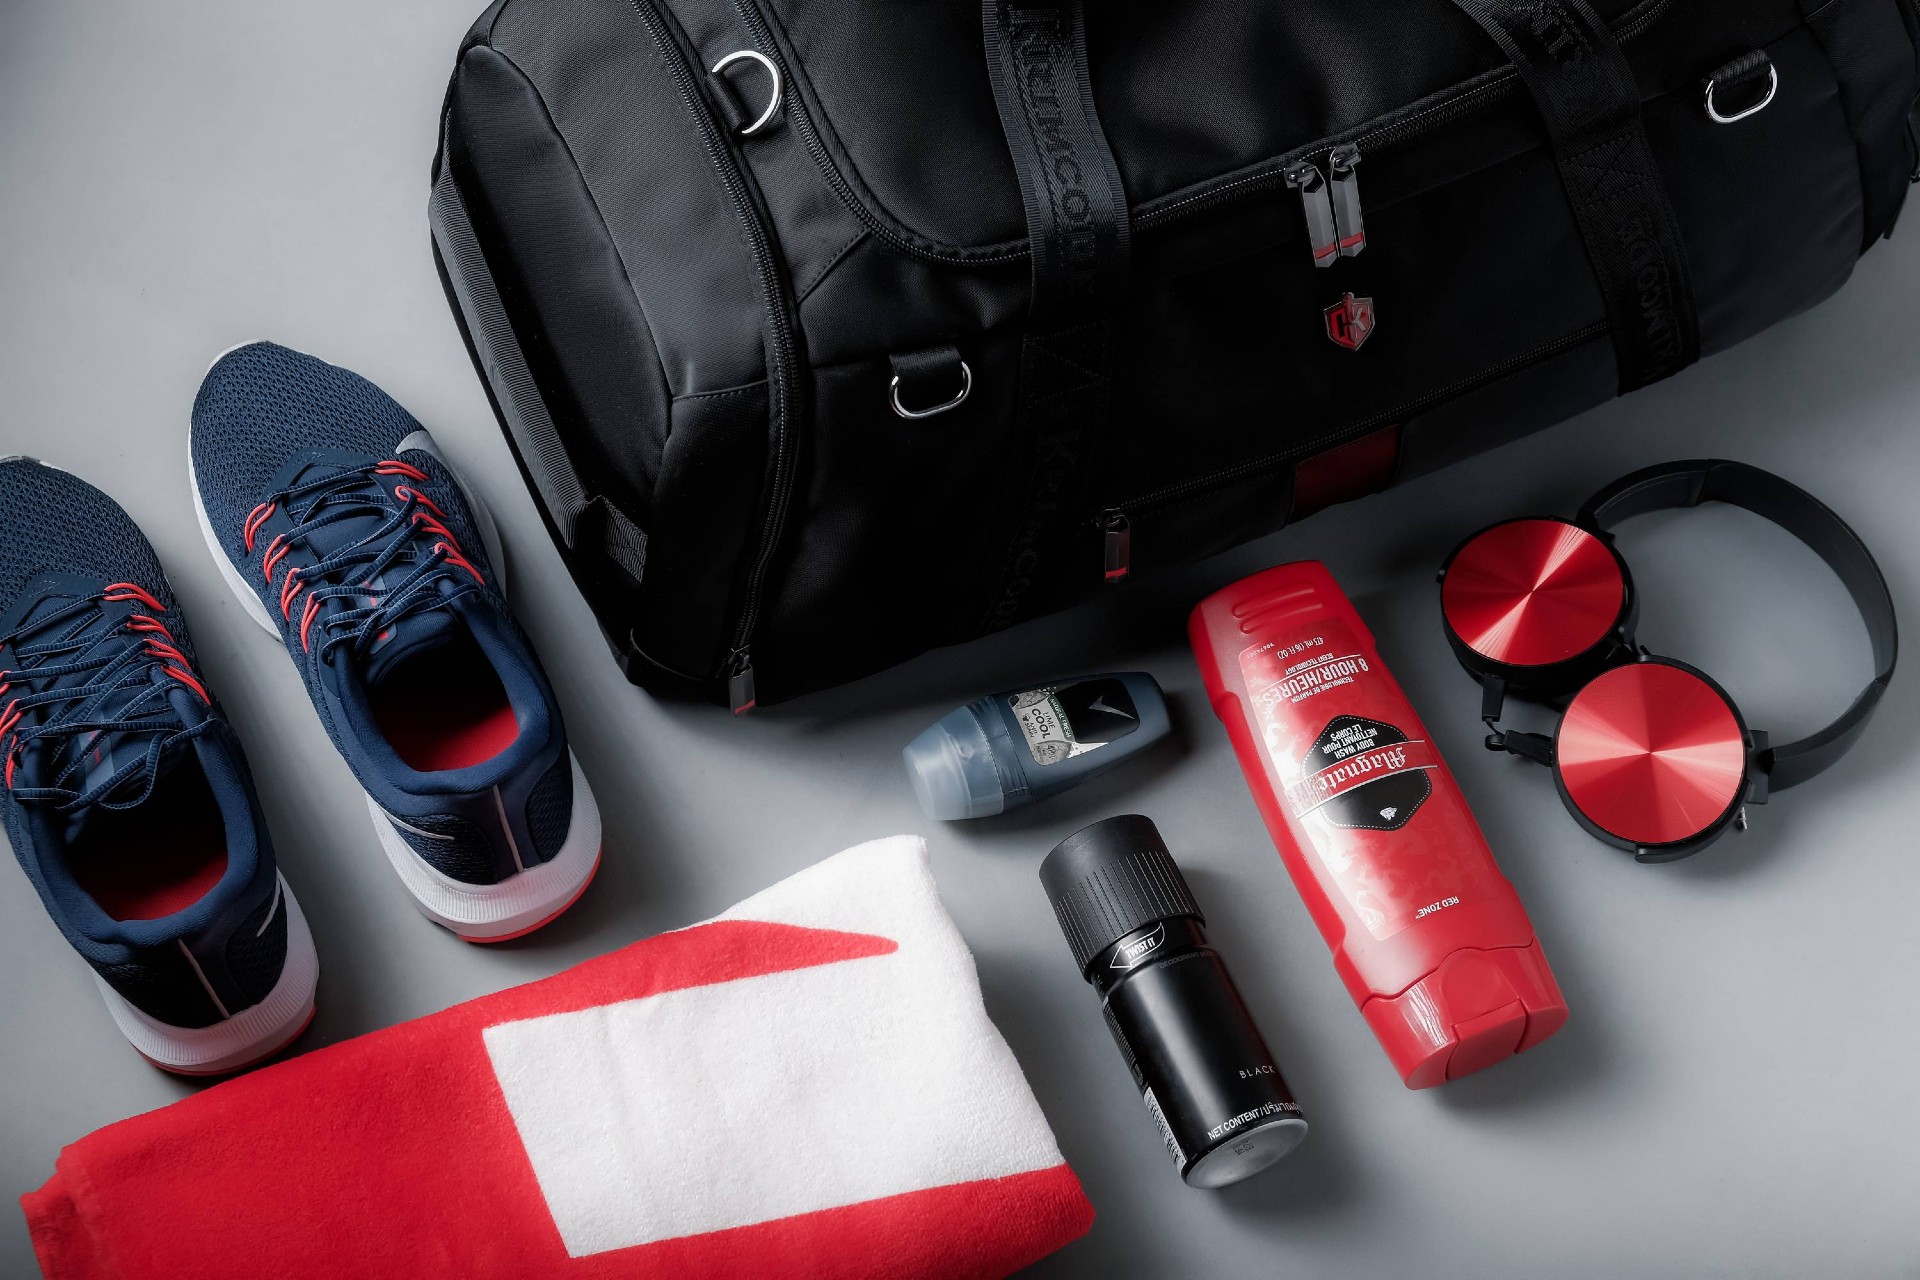 9 Essentials Gym Bag Items to Pack Up Easily! - The Fitness Aussie